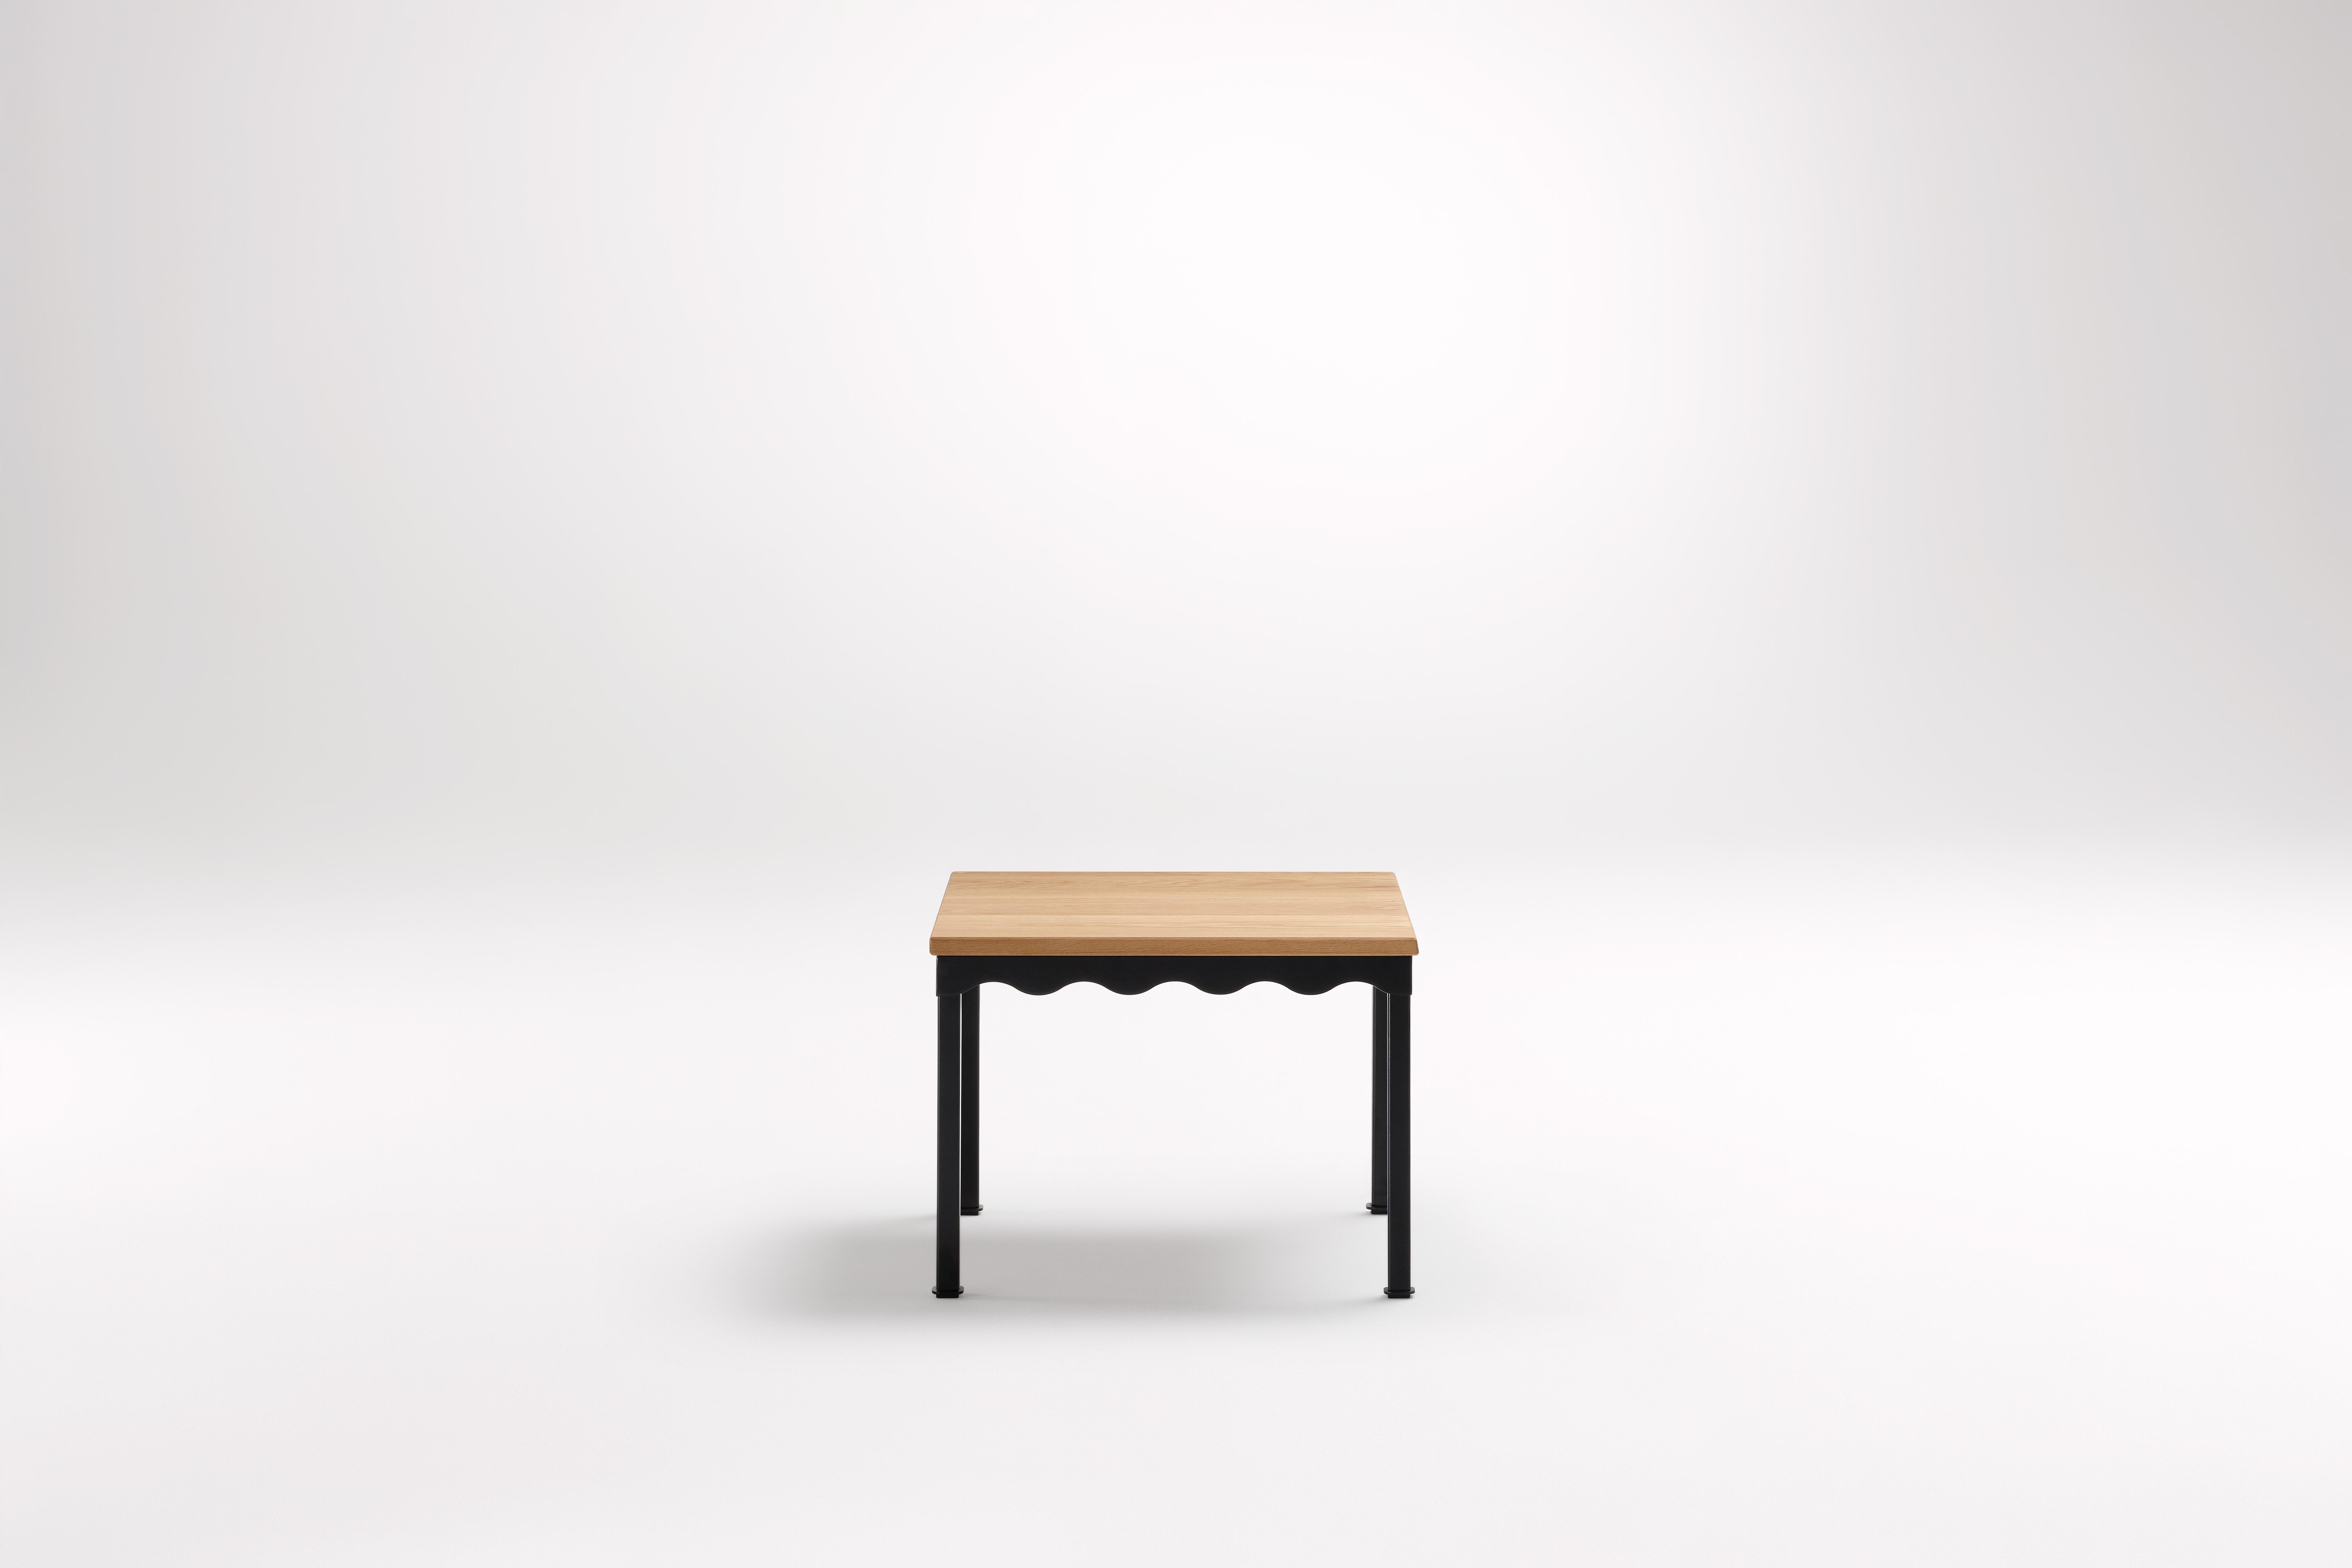 American Oak Bellini Side Table by Coco Flip
Dimensions: D 54 x W 54 x H 39 cm
Materials: Timber / Stone tops, Powder-coated steel frame. 
Weight: 12 kg
Timber Tops :American Oak
Frame Finishes: Textura Black.

Coco Flip is a Melbourne based